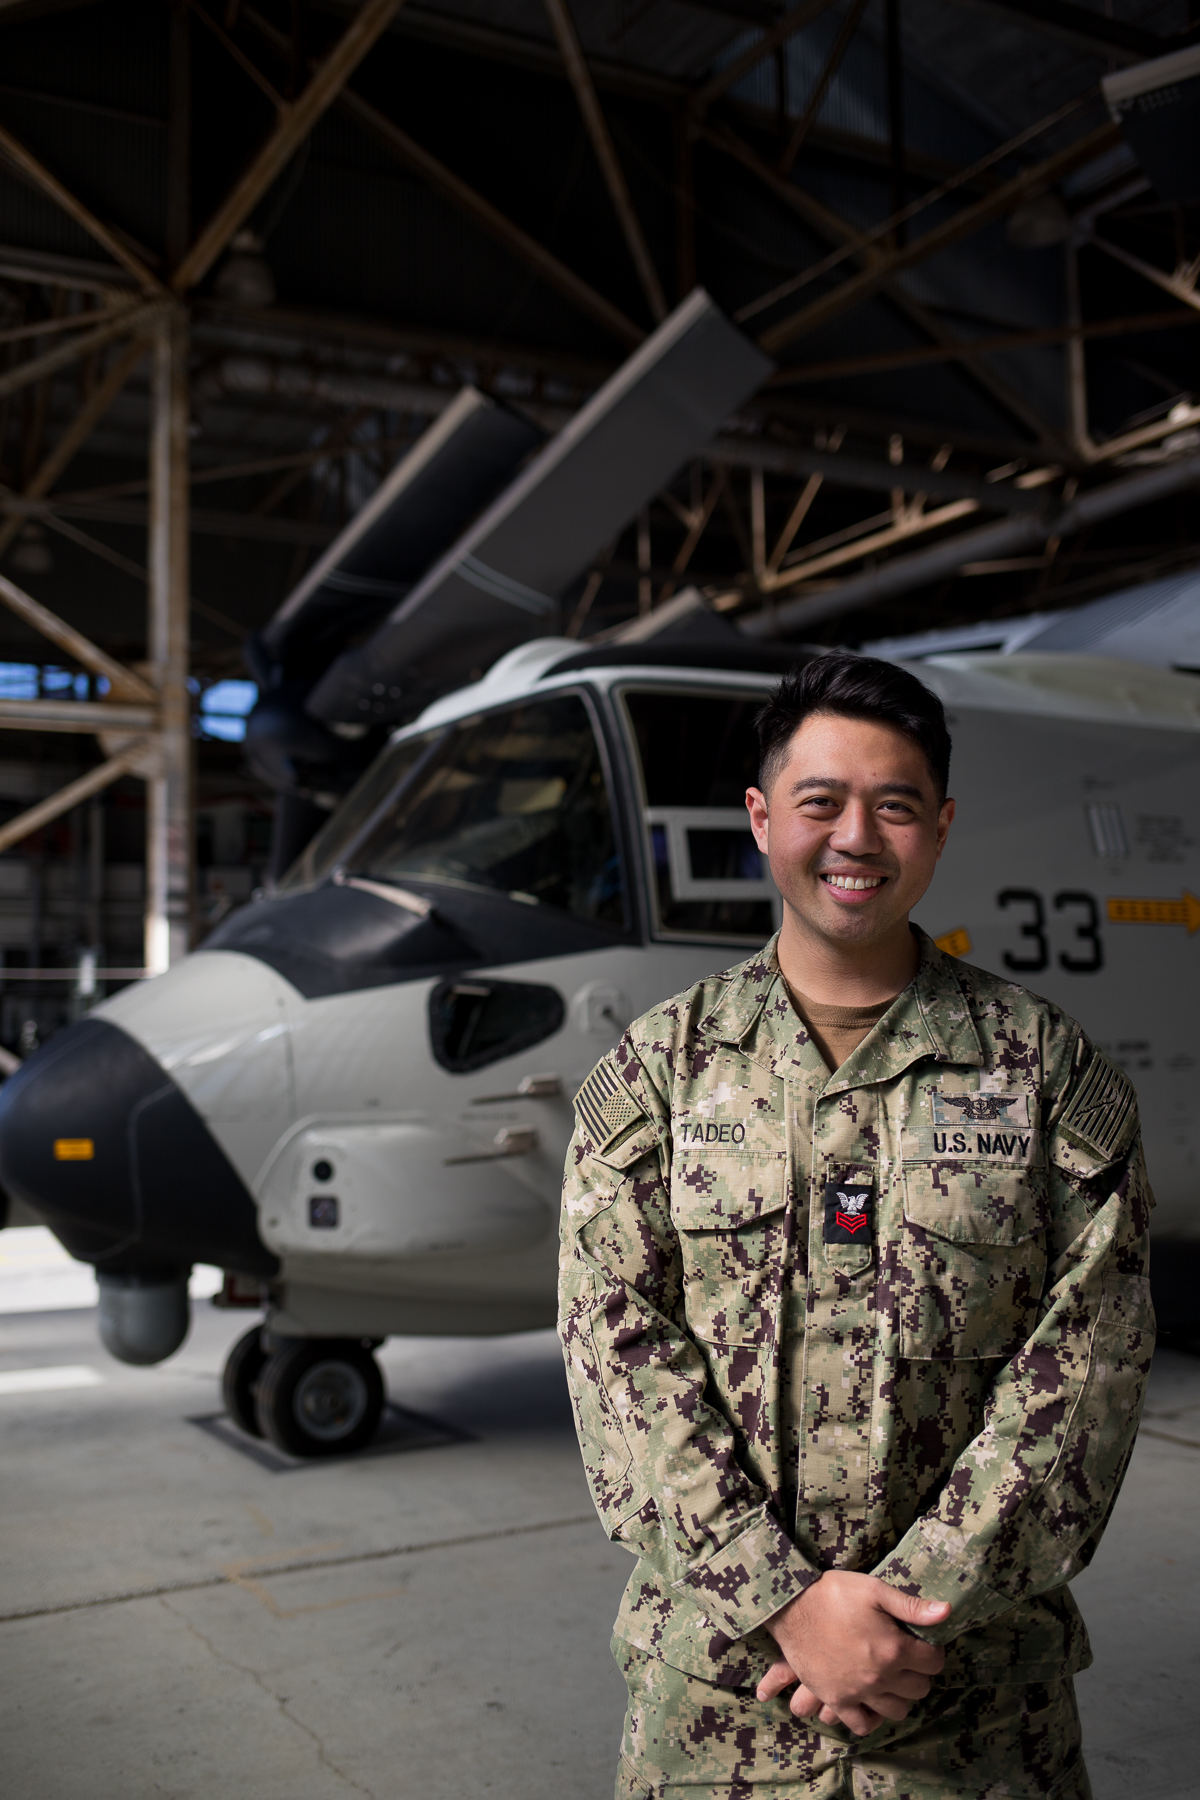 Virginia Beach native serves with one of the Navy’s newest tilt-rotor aircraft squadrons